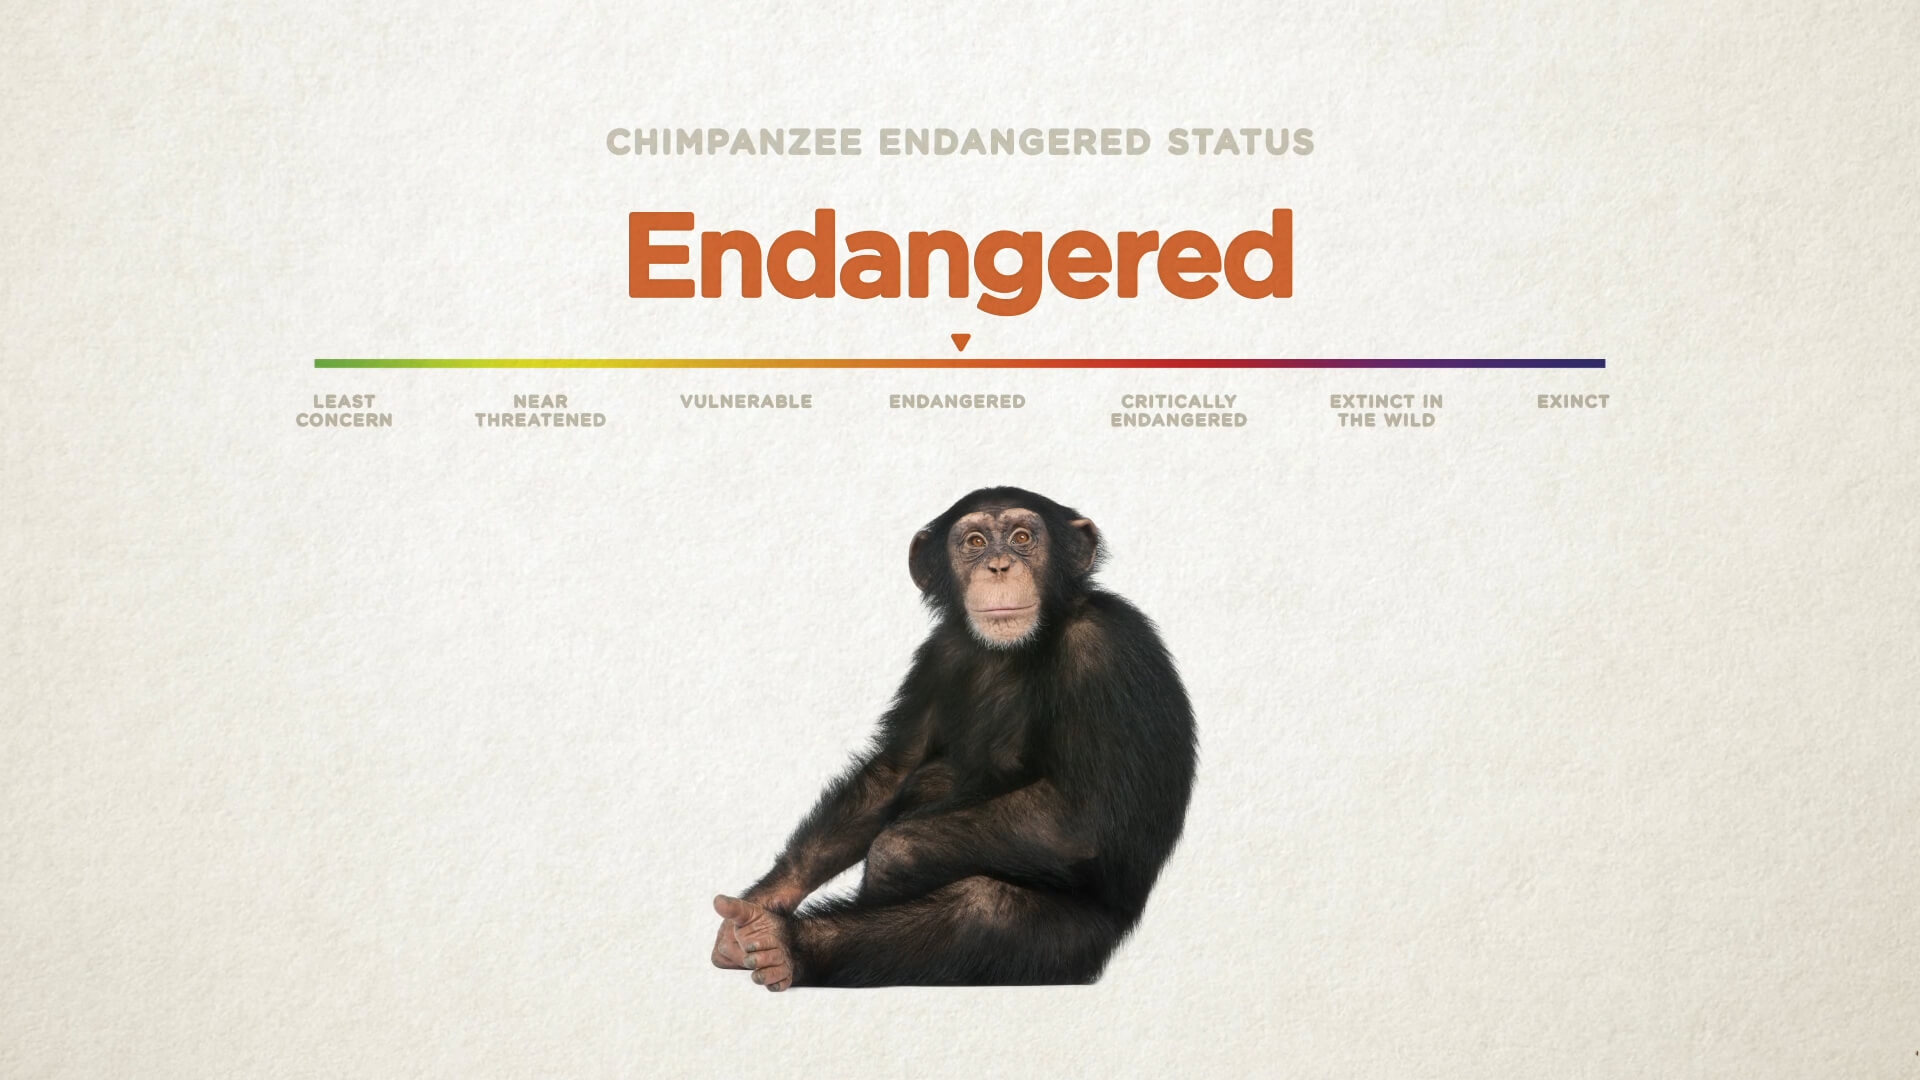 chimp showing on a scale as endangered